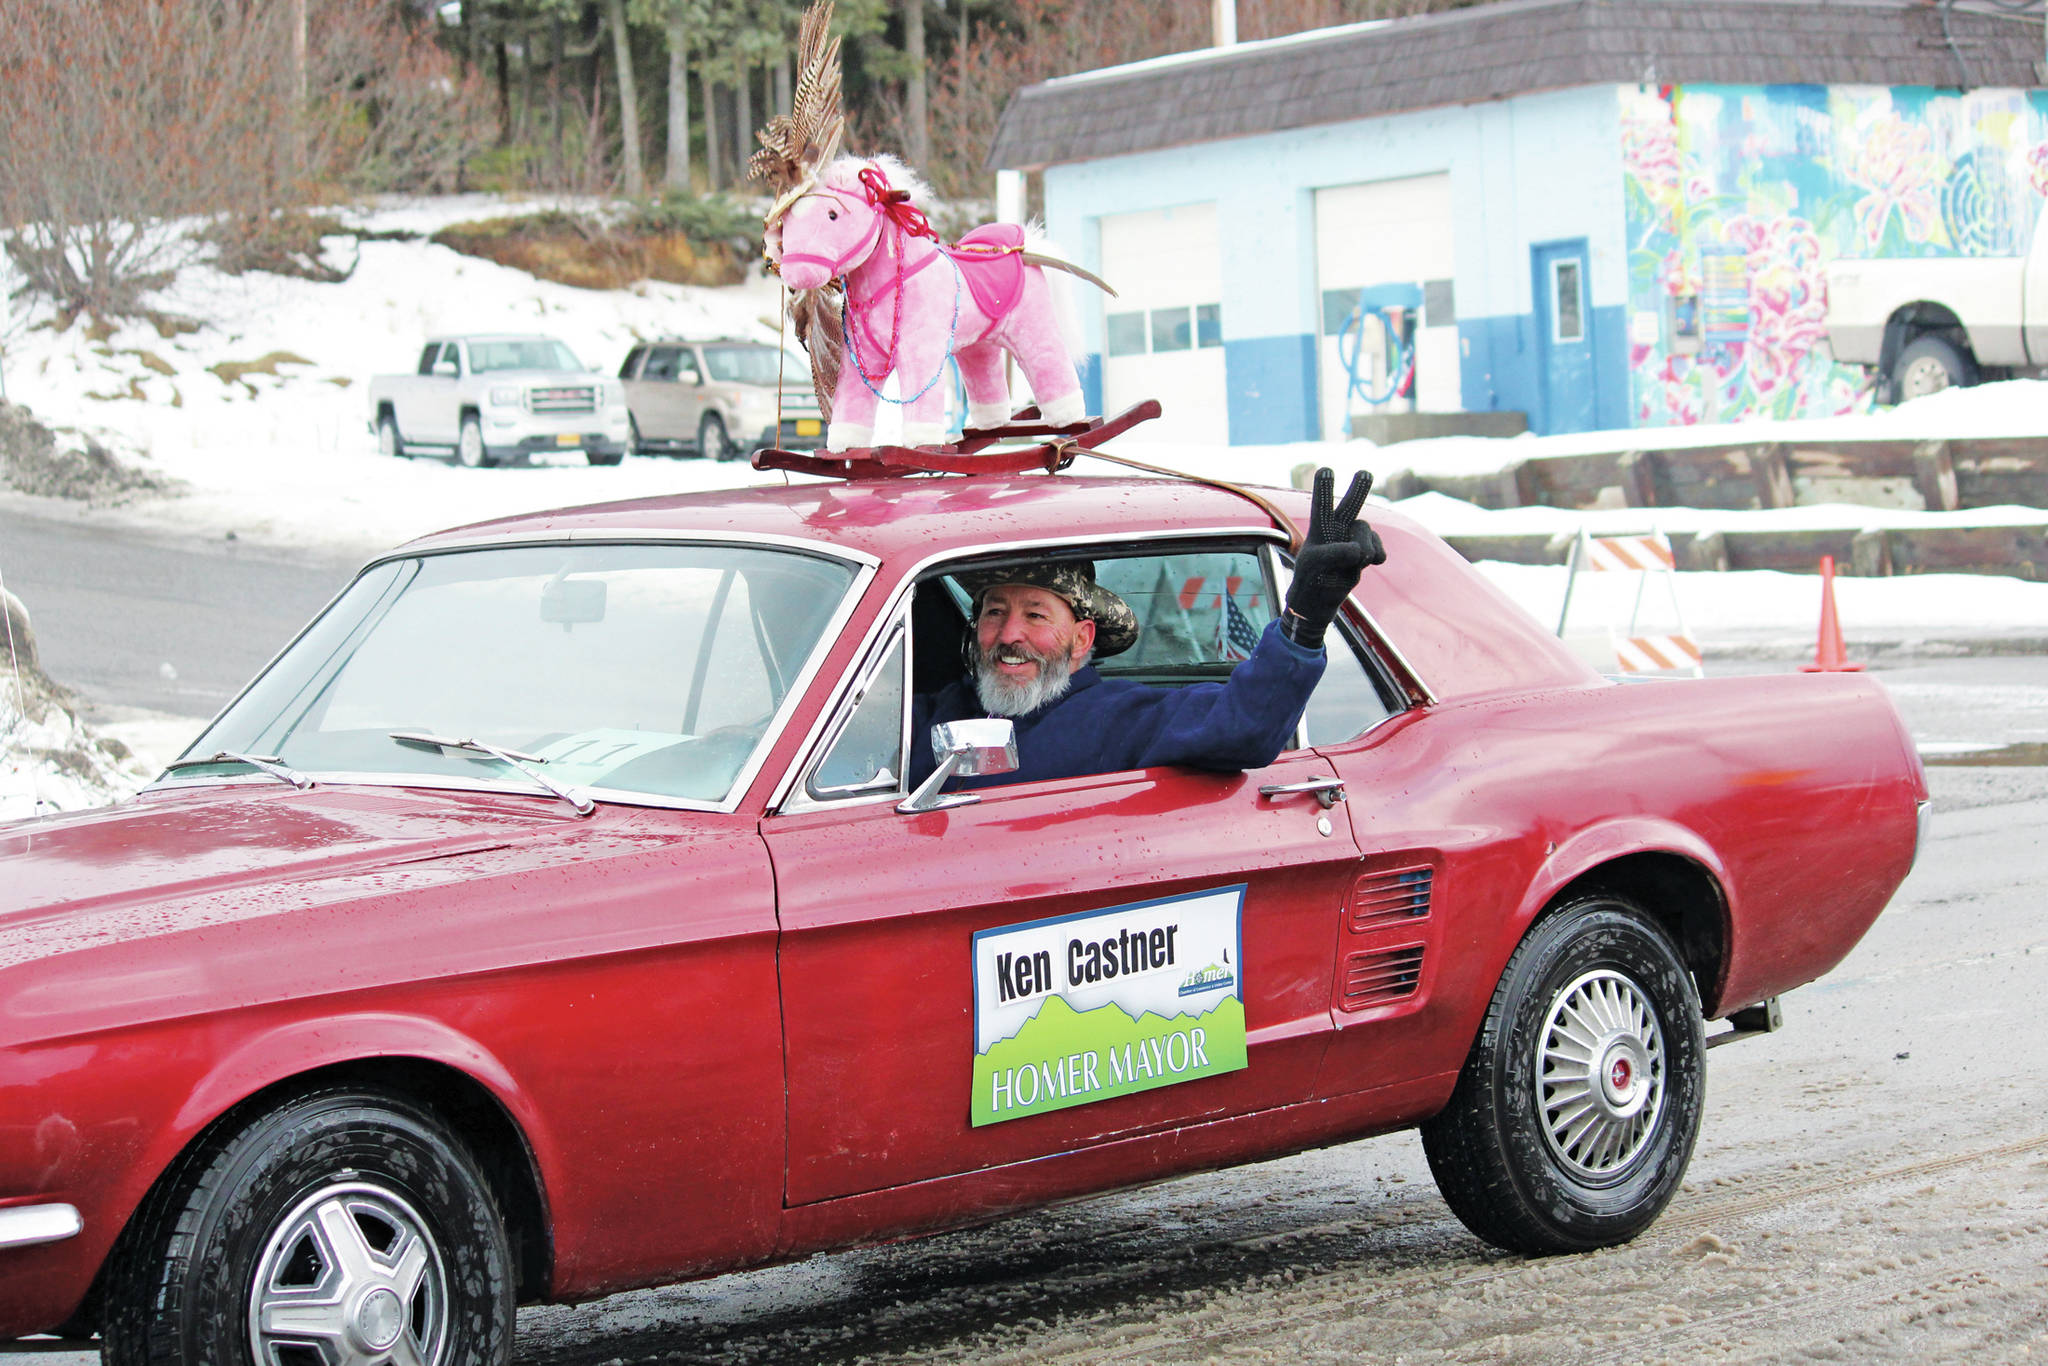 Former Mayor Bryan Zak drives the car for the float representing Mayor Ken Castner’s office during this year’s Homer Winter Carnival Parade on Saturday, Feb. 8, 2020 on Pioneer Avenue in Homer, Alaska. (Photo by Megan Pacer/Homer News)